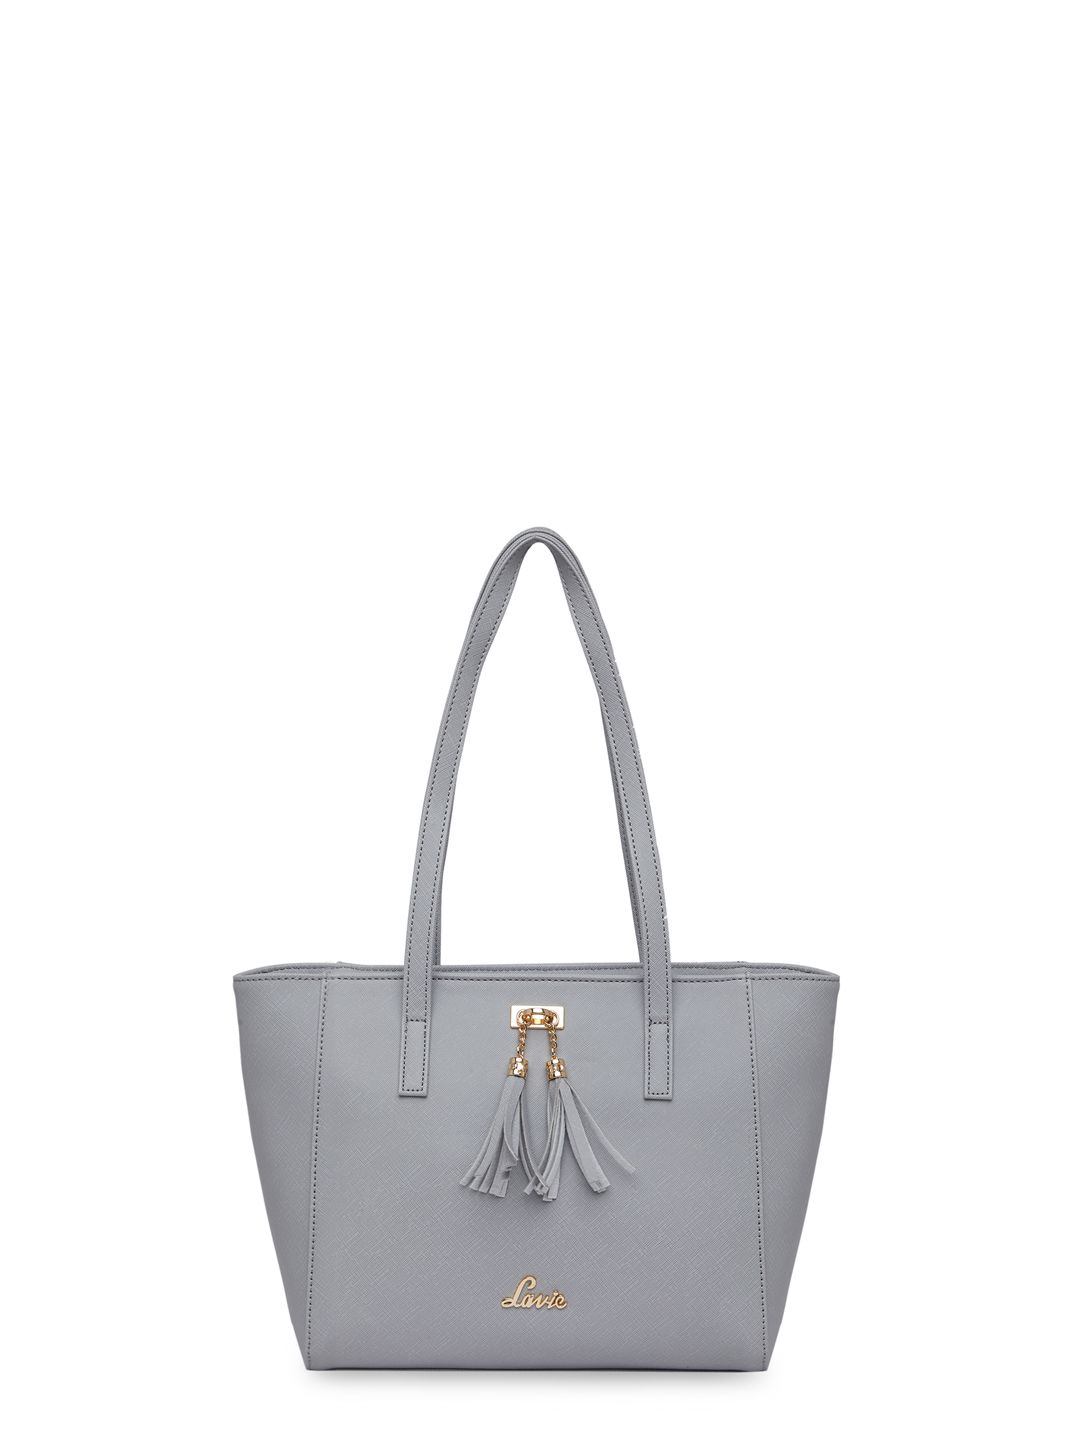 Lavie Grey Solid Structured Shoulder Bag with Tassel Detailing Price in India